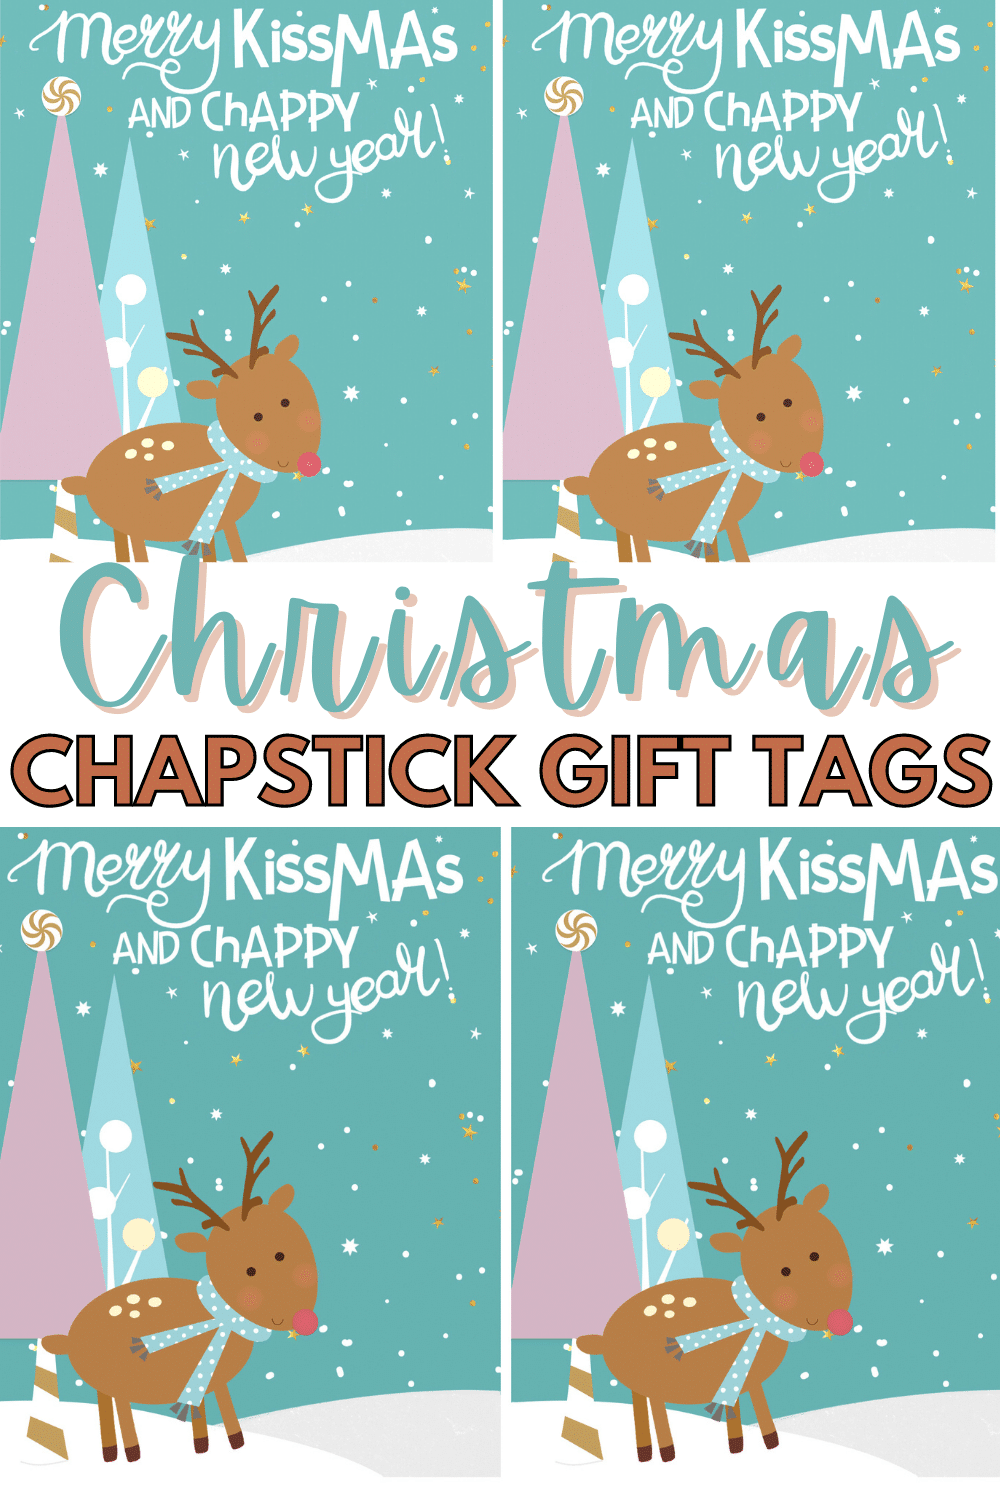 These Christmas Chapstick Gift Tags are a fun way to make fun gifts easily right at home! Free holiday gift tag printable! #gifttags #chapstick #christmas #freeprintable via @wondermomwannab